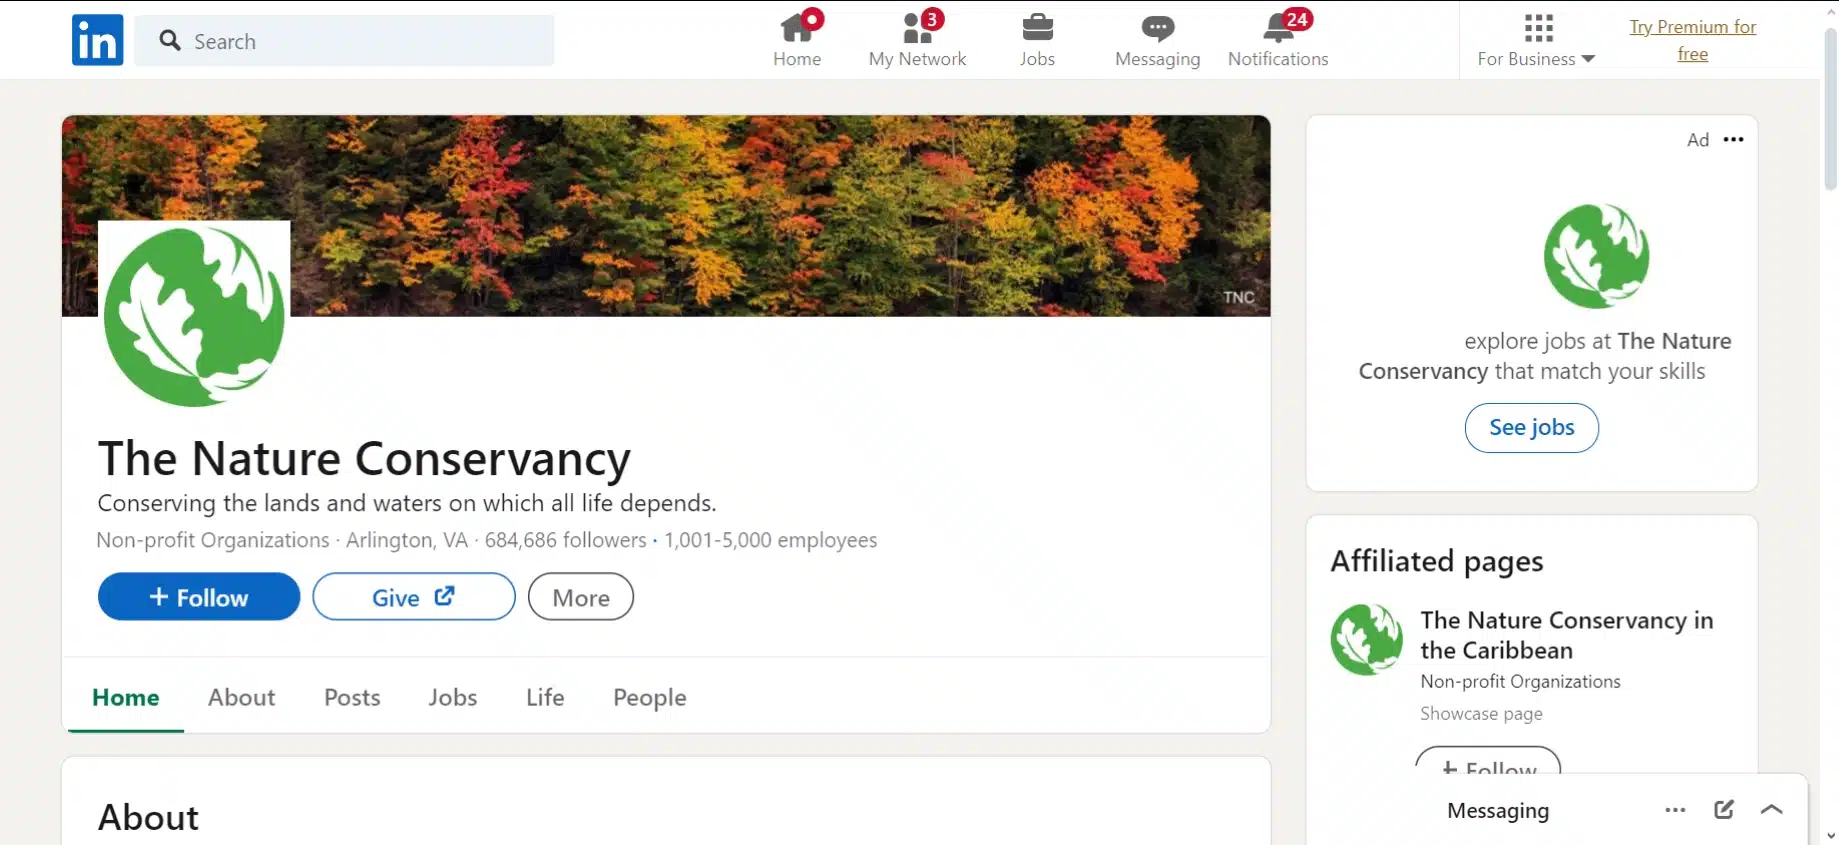 The Nature Conservancy LinkedIn Company Page